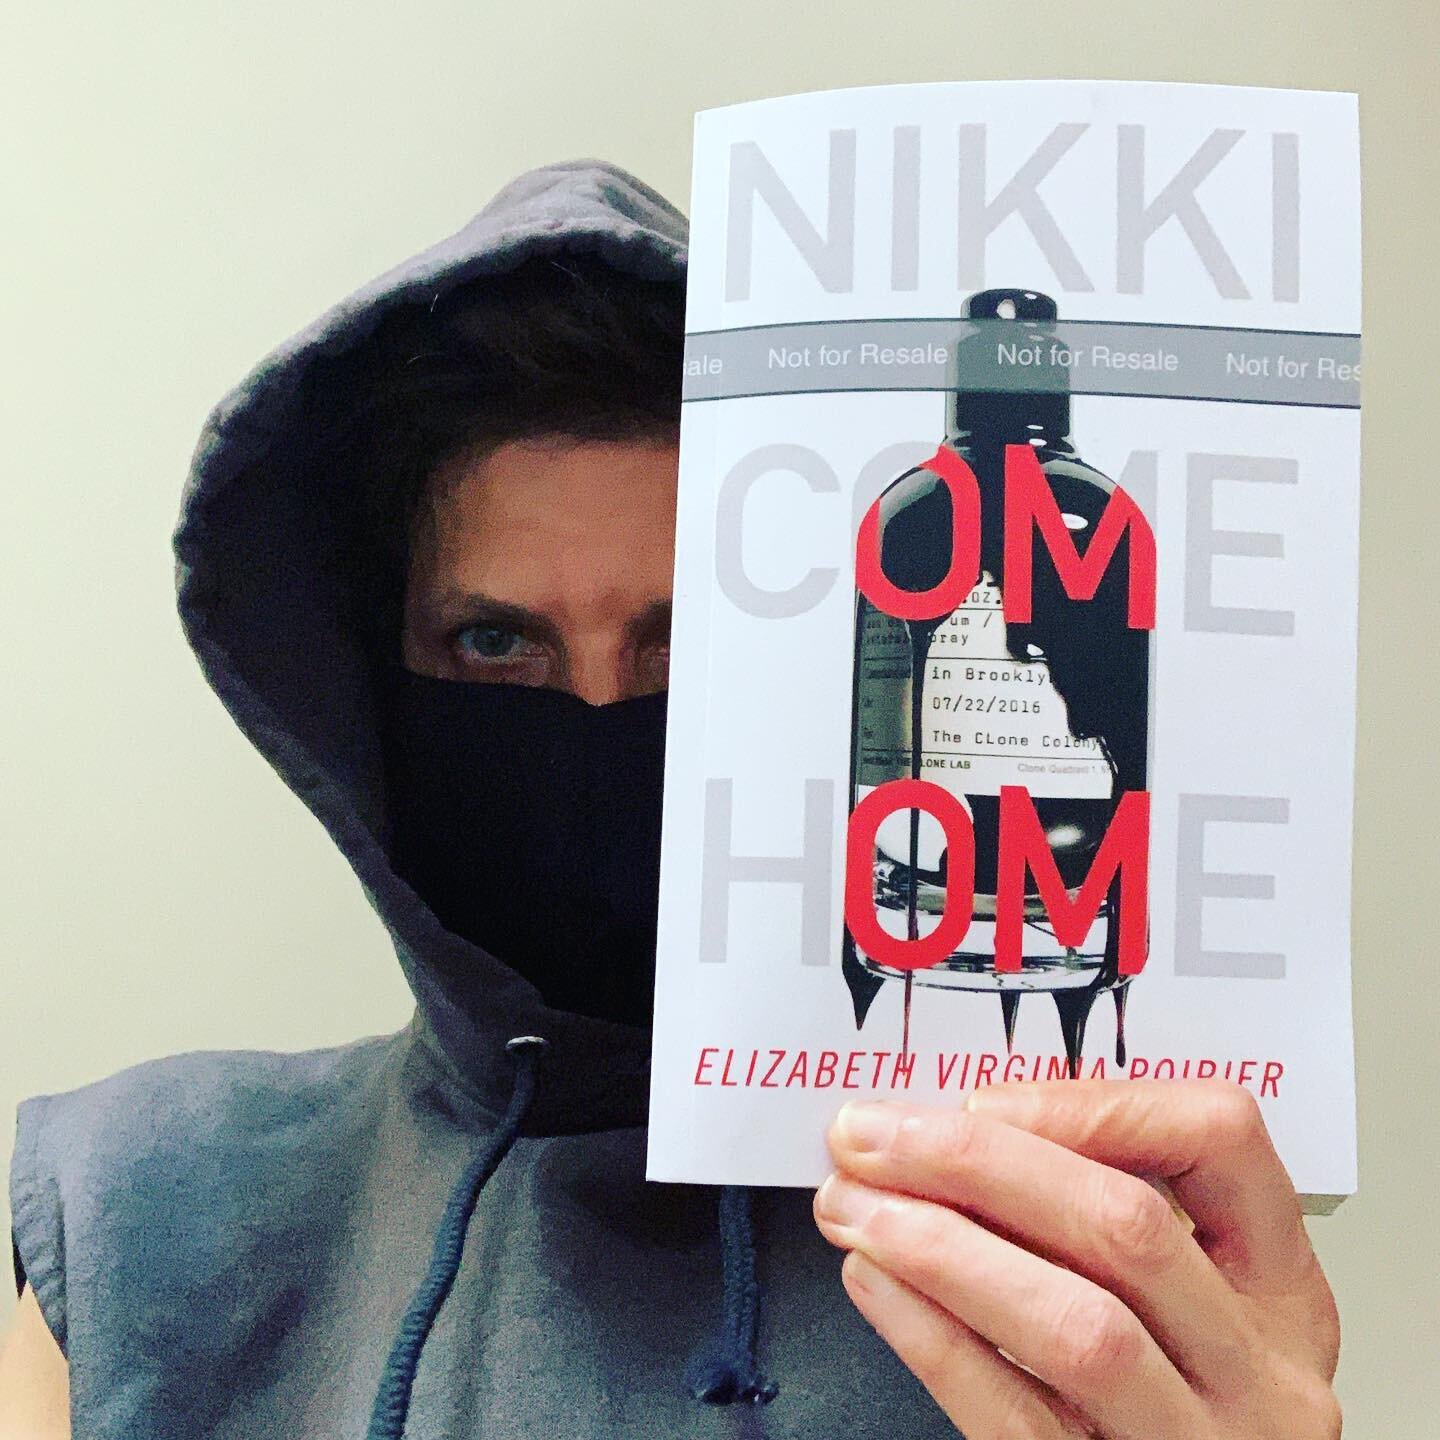 As you can probably read from my expression I&rsquo;m super pumped to receive an authors copy of #nikkicomehome. Almost there @metive of @aqualamb_records ! In a matter of days the novel will be available in printed form for non-ebook readers. Hell y